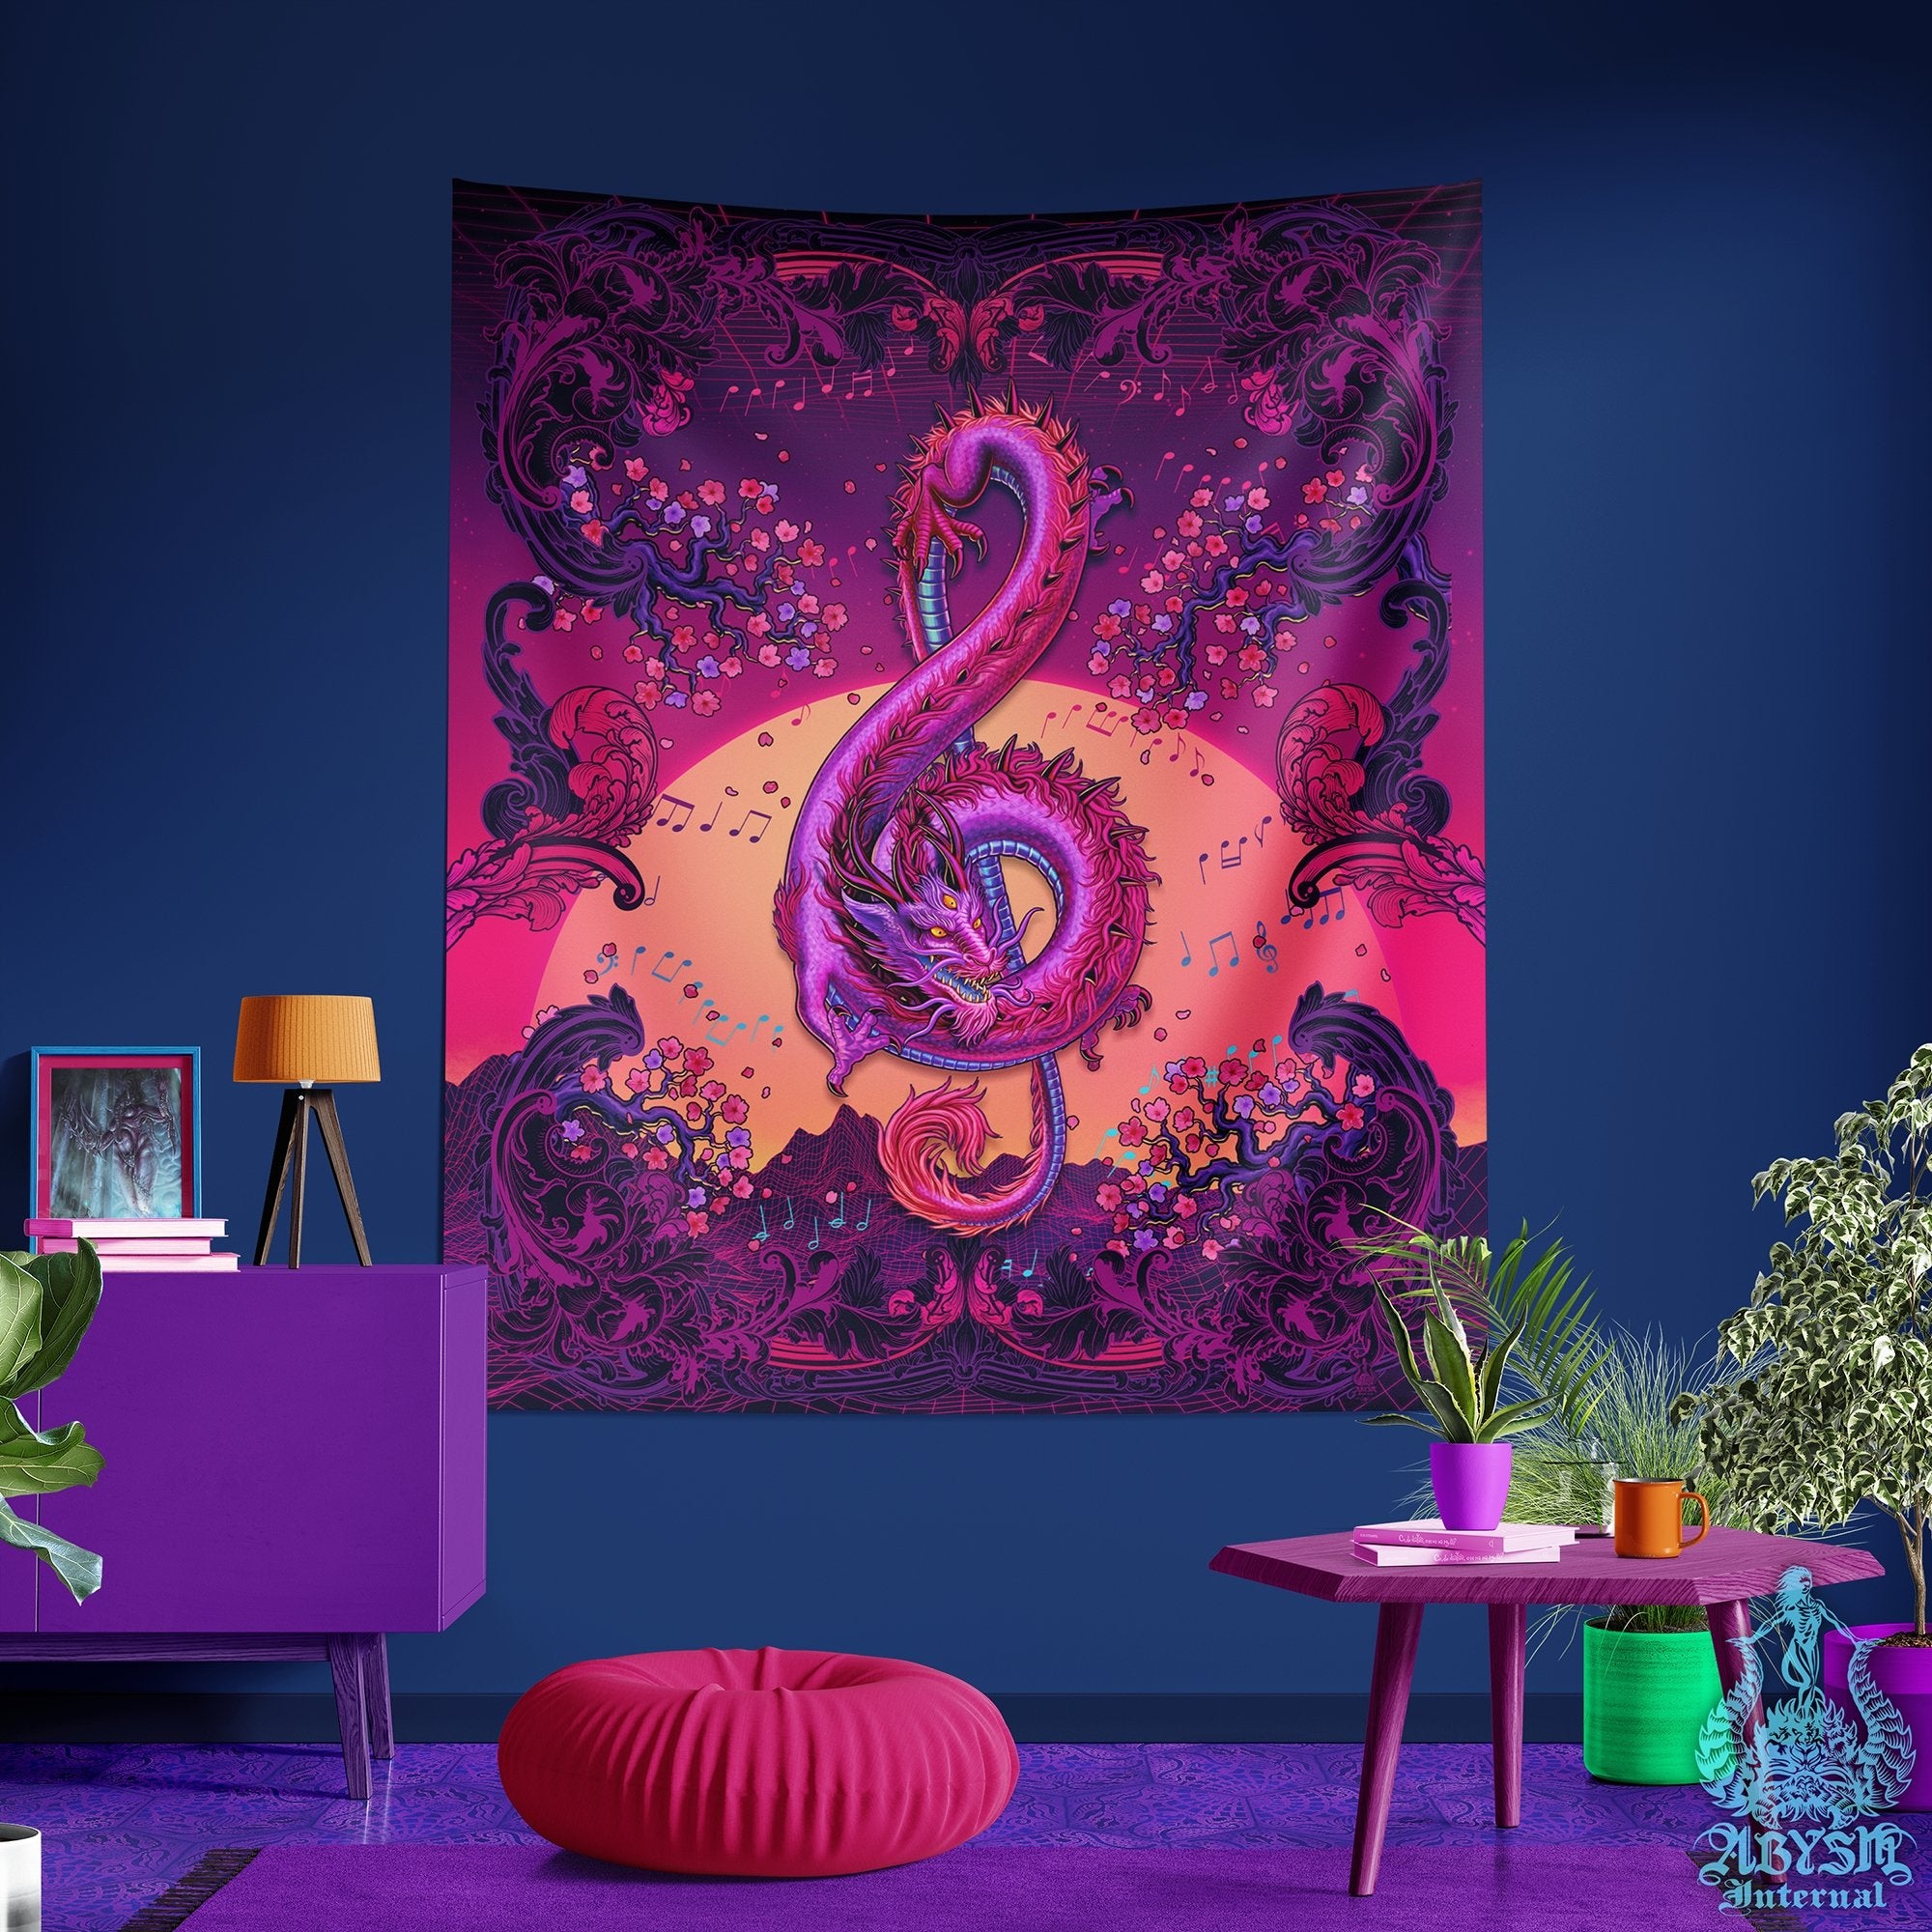 Psychedelic Dragon Tapestry, Vaporwave Wall Hanging, Retrowave 80s